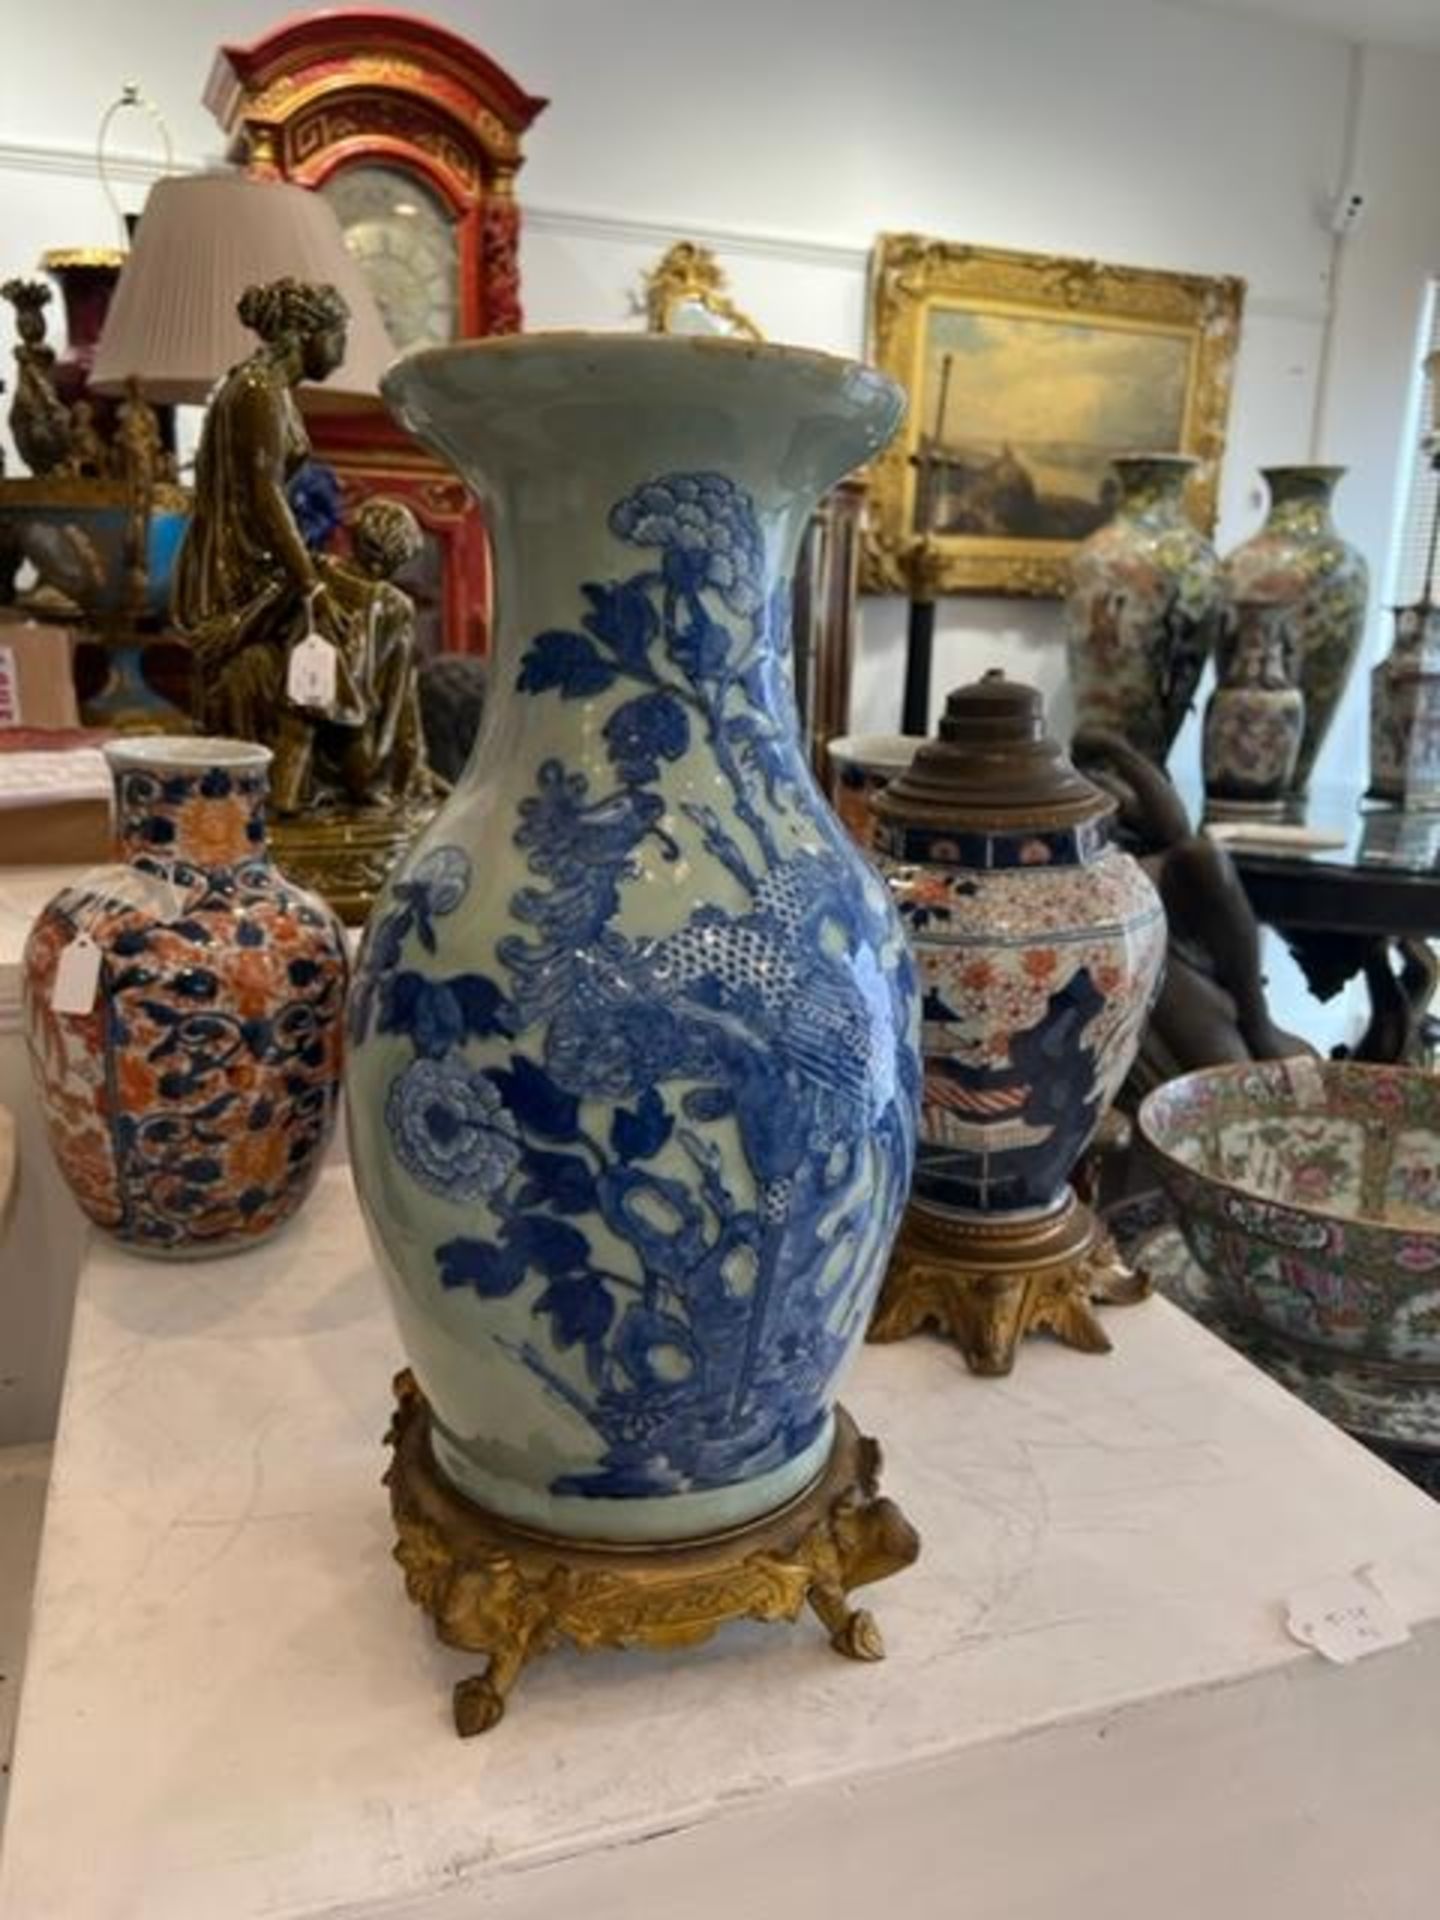 A 19TH CENTURY CHINESE QING PERIOD CELADON AND BLUE PORCELAIN AND ORMOLU VASE - Image 11 of 15